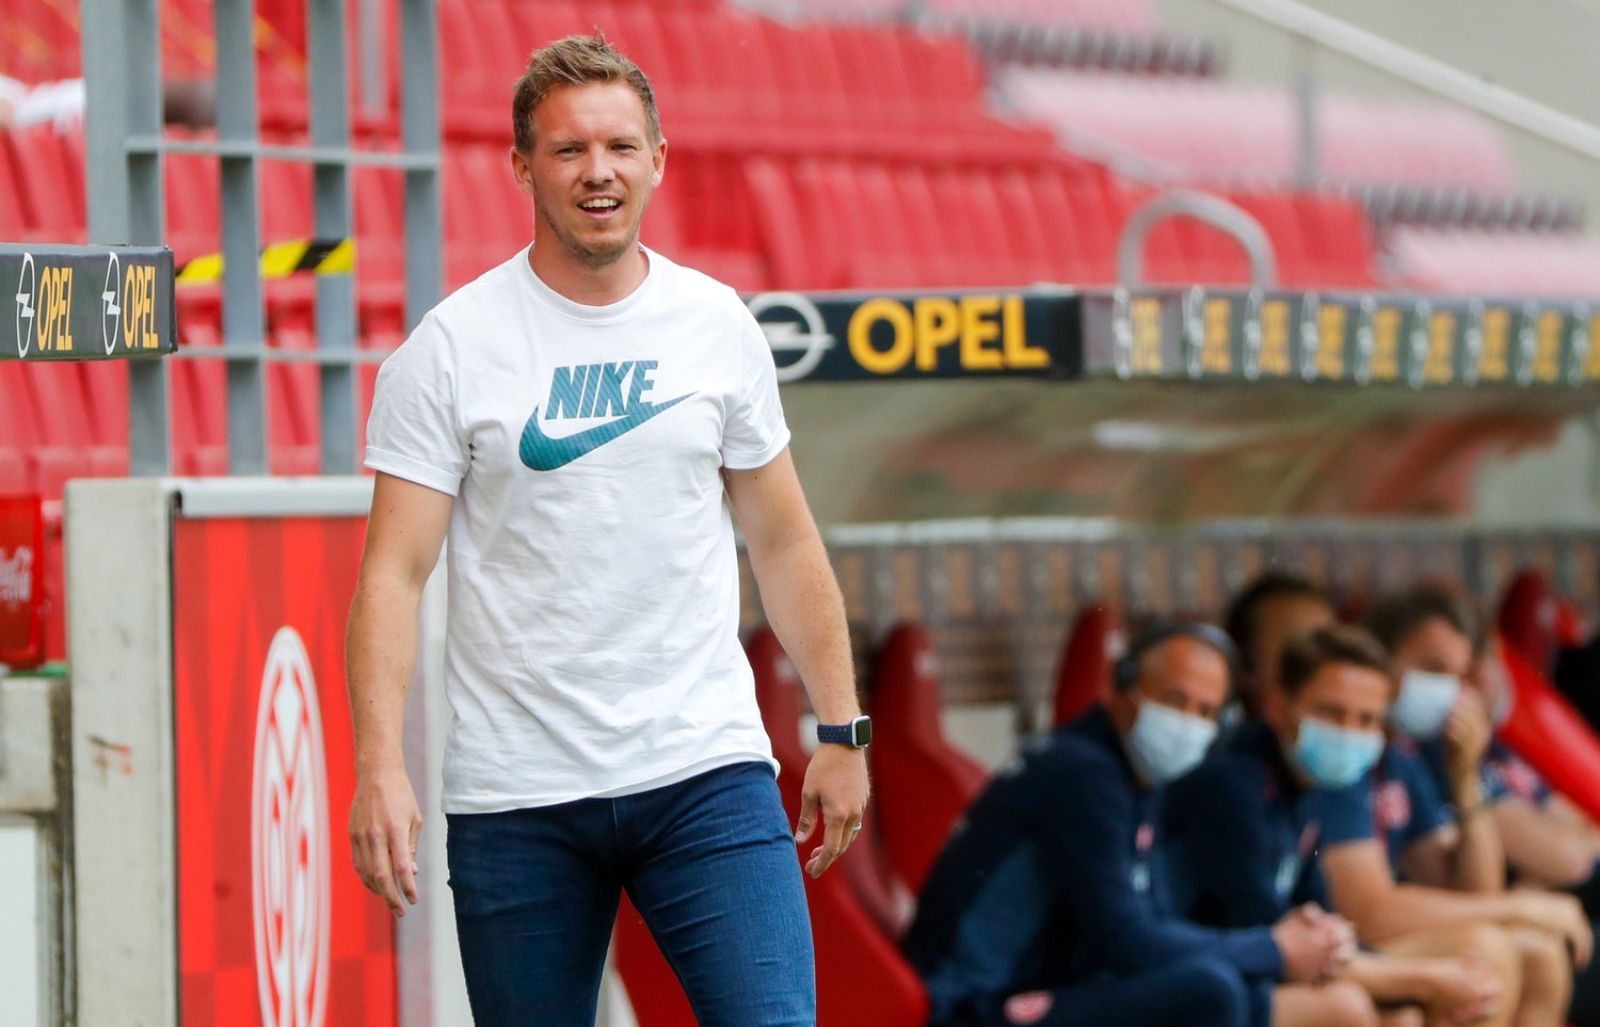 Nagelsmann be the coach ever sponsored by Nike